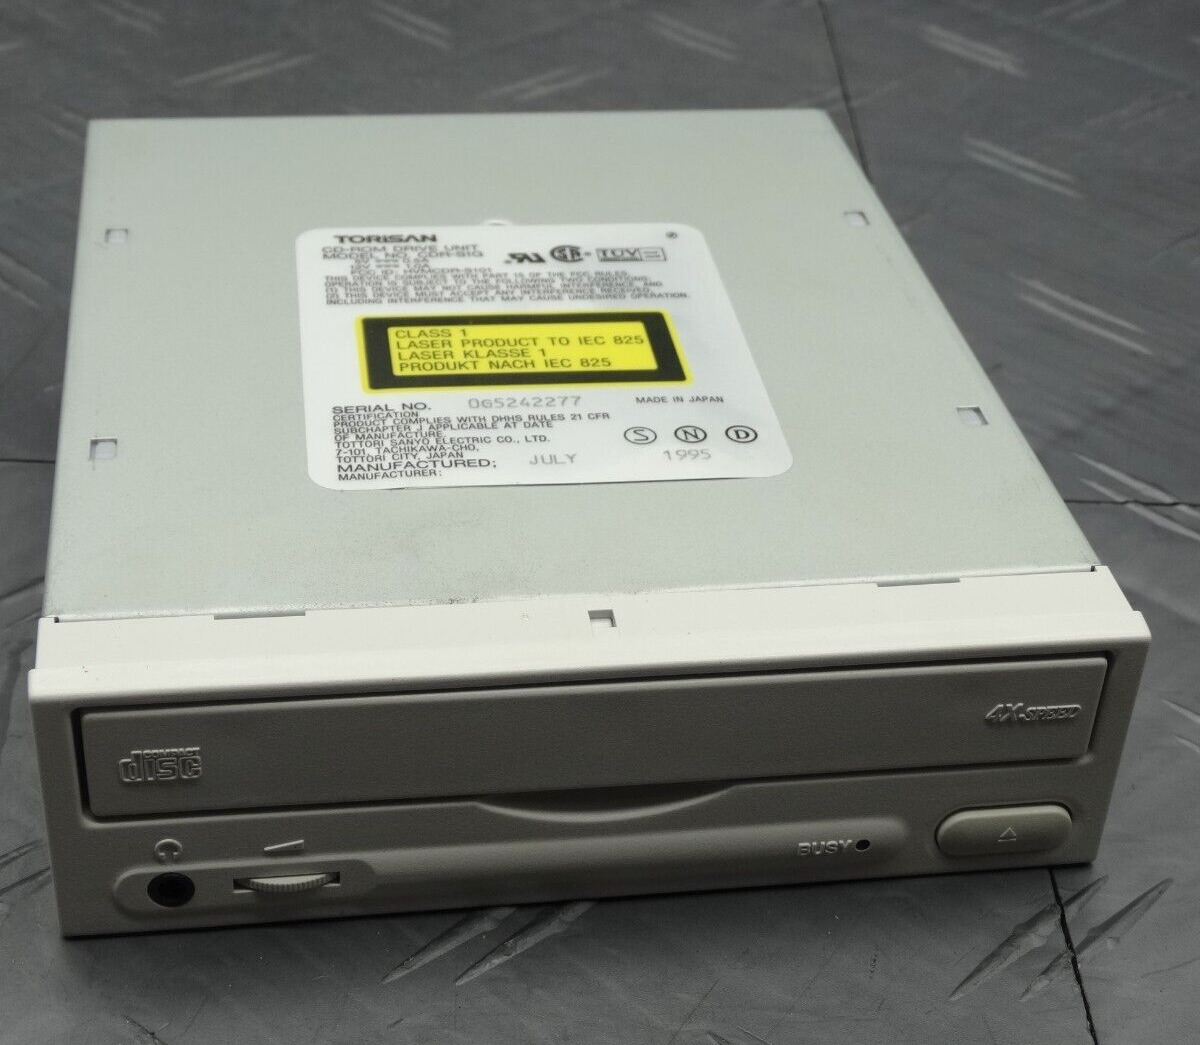 TORISAN CD-ROM DRIVE 4X IDE Connection CDR-S1G Made In Japan